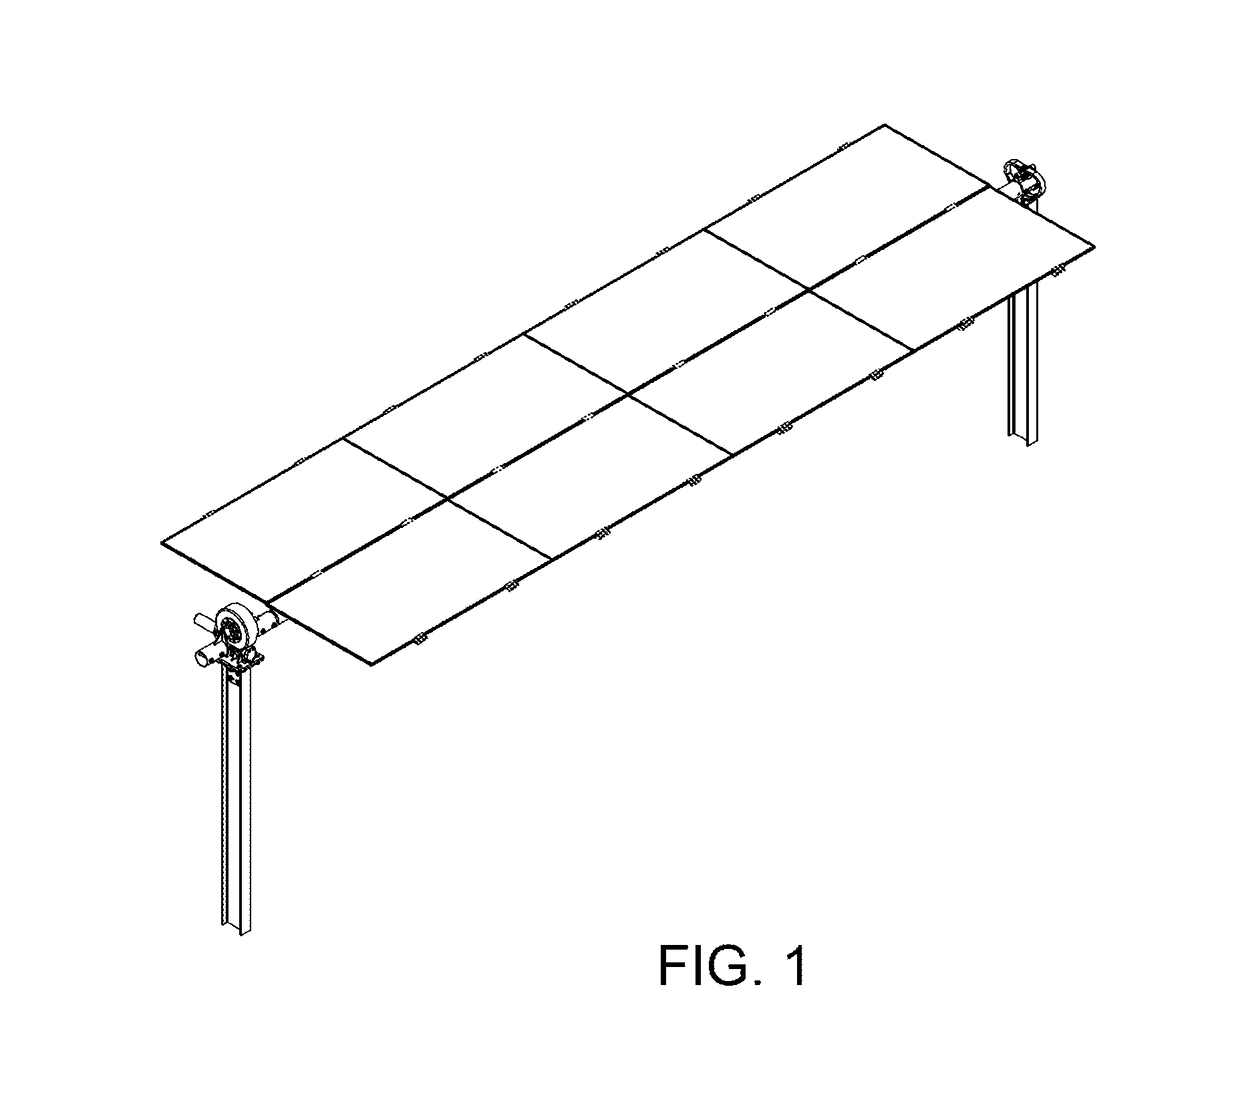 Off-set swivel drive assembly for solar tracker